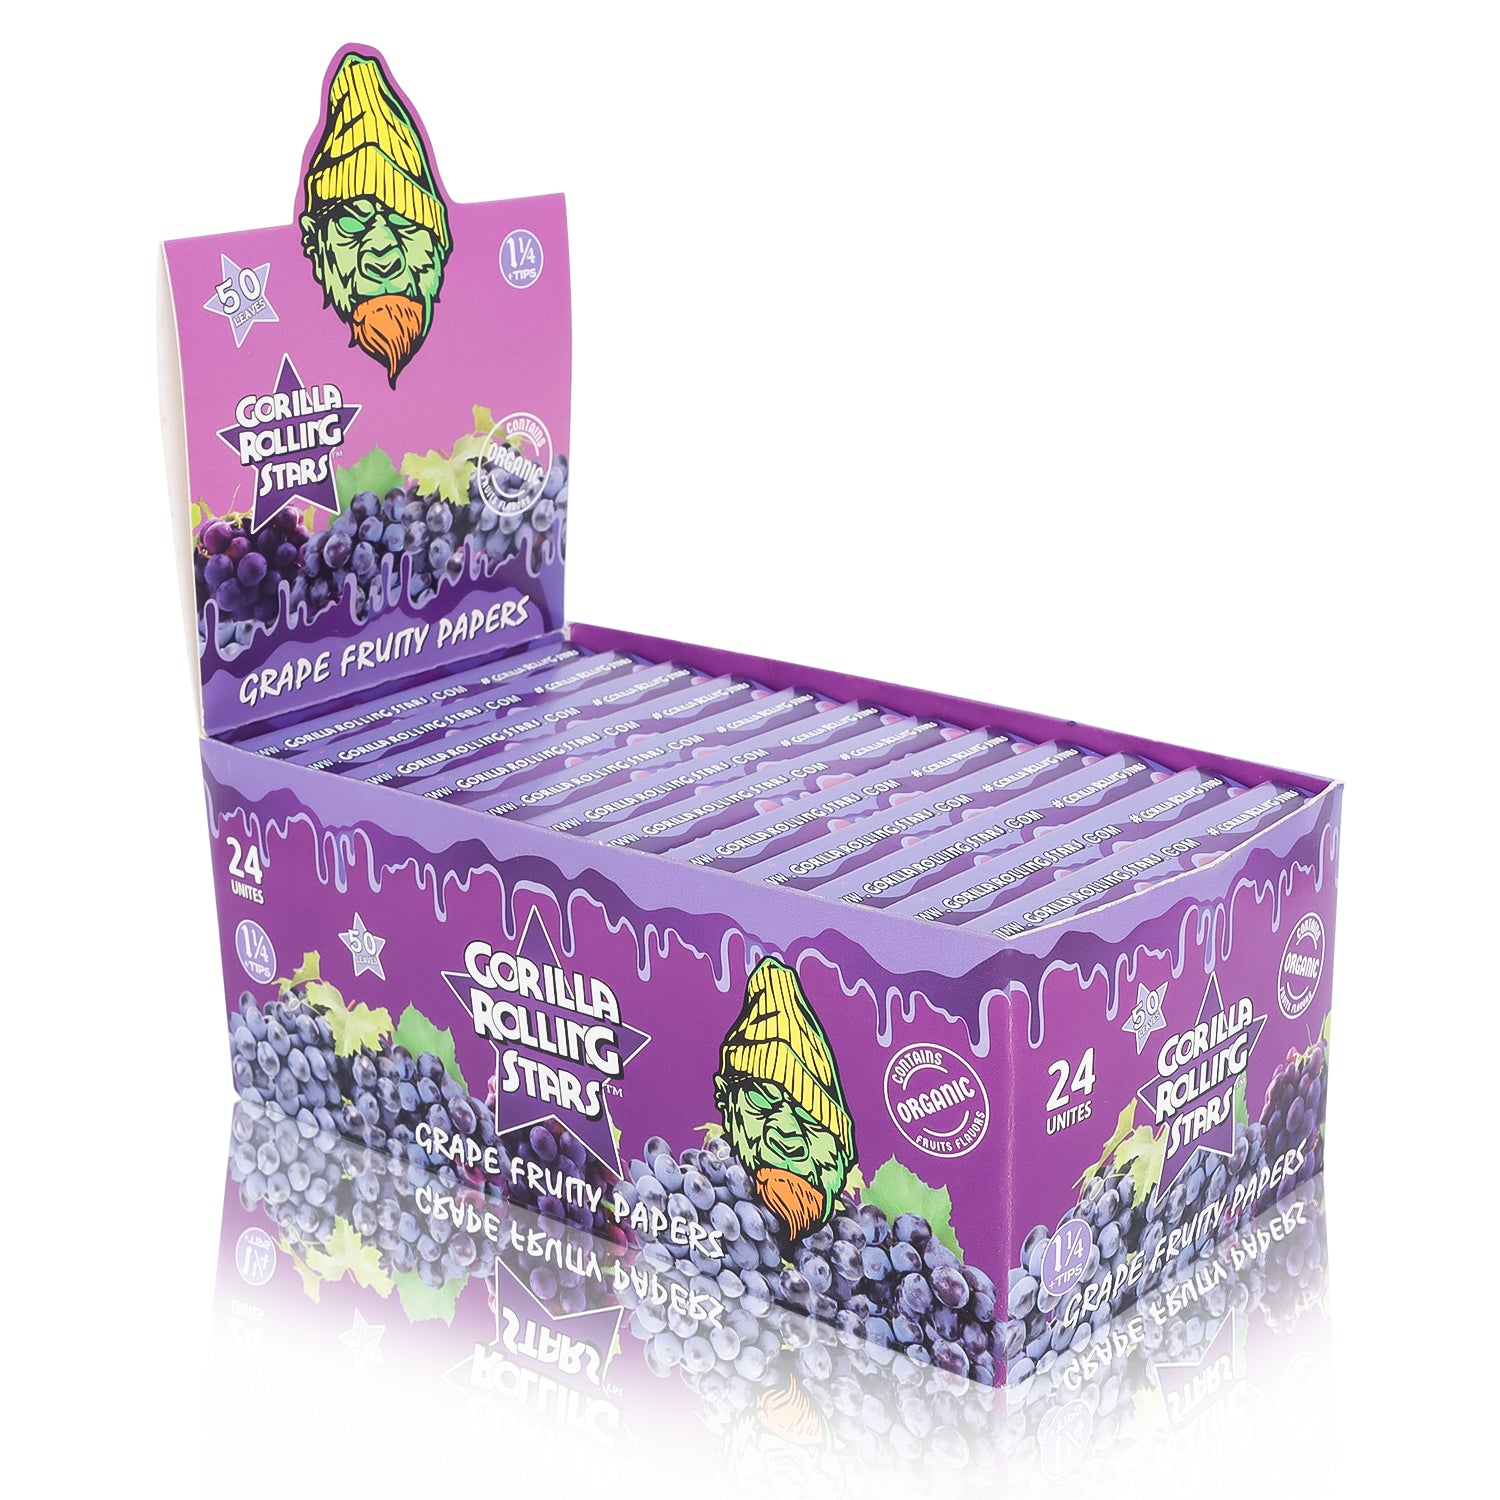 GORILLA ROLLING STARS&nbsp;&nbsp; series 78mm 1 1/4 size grape flavor rolling paper with filter paper